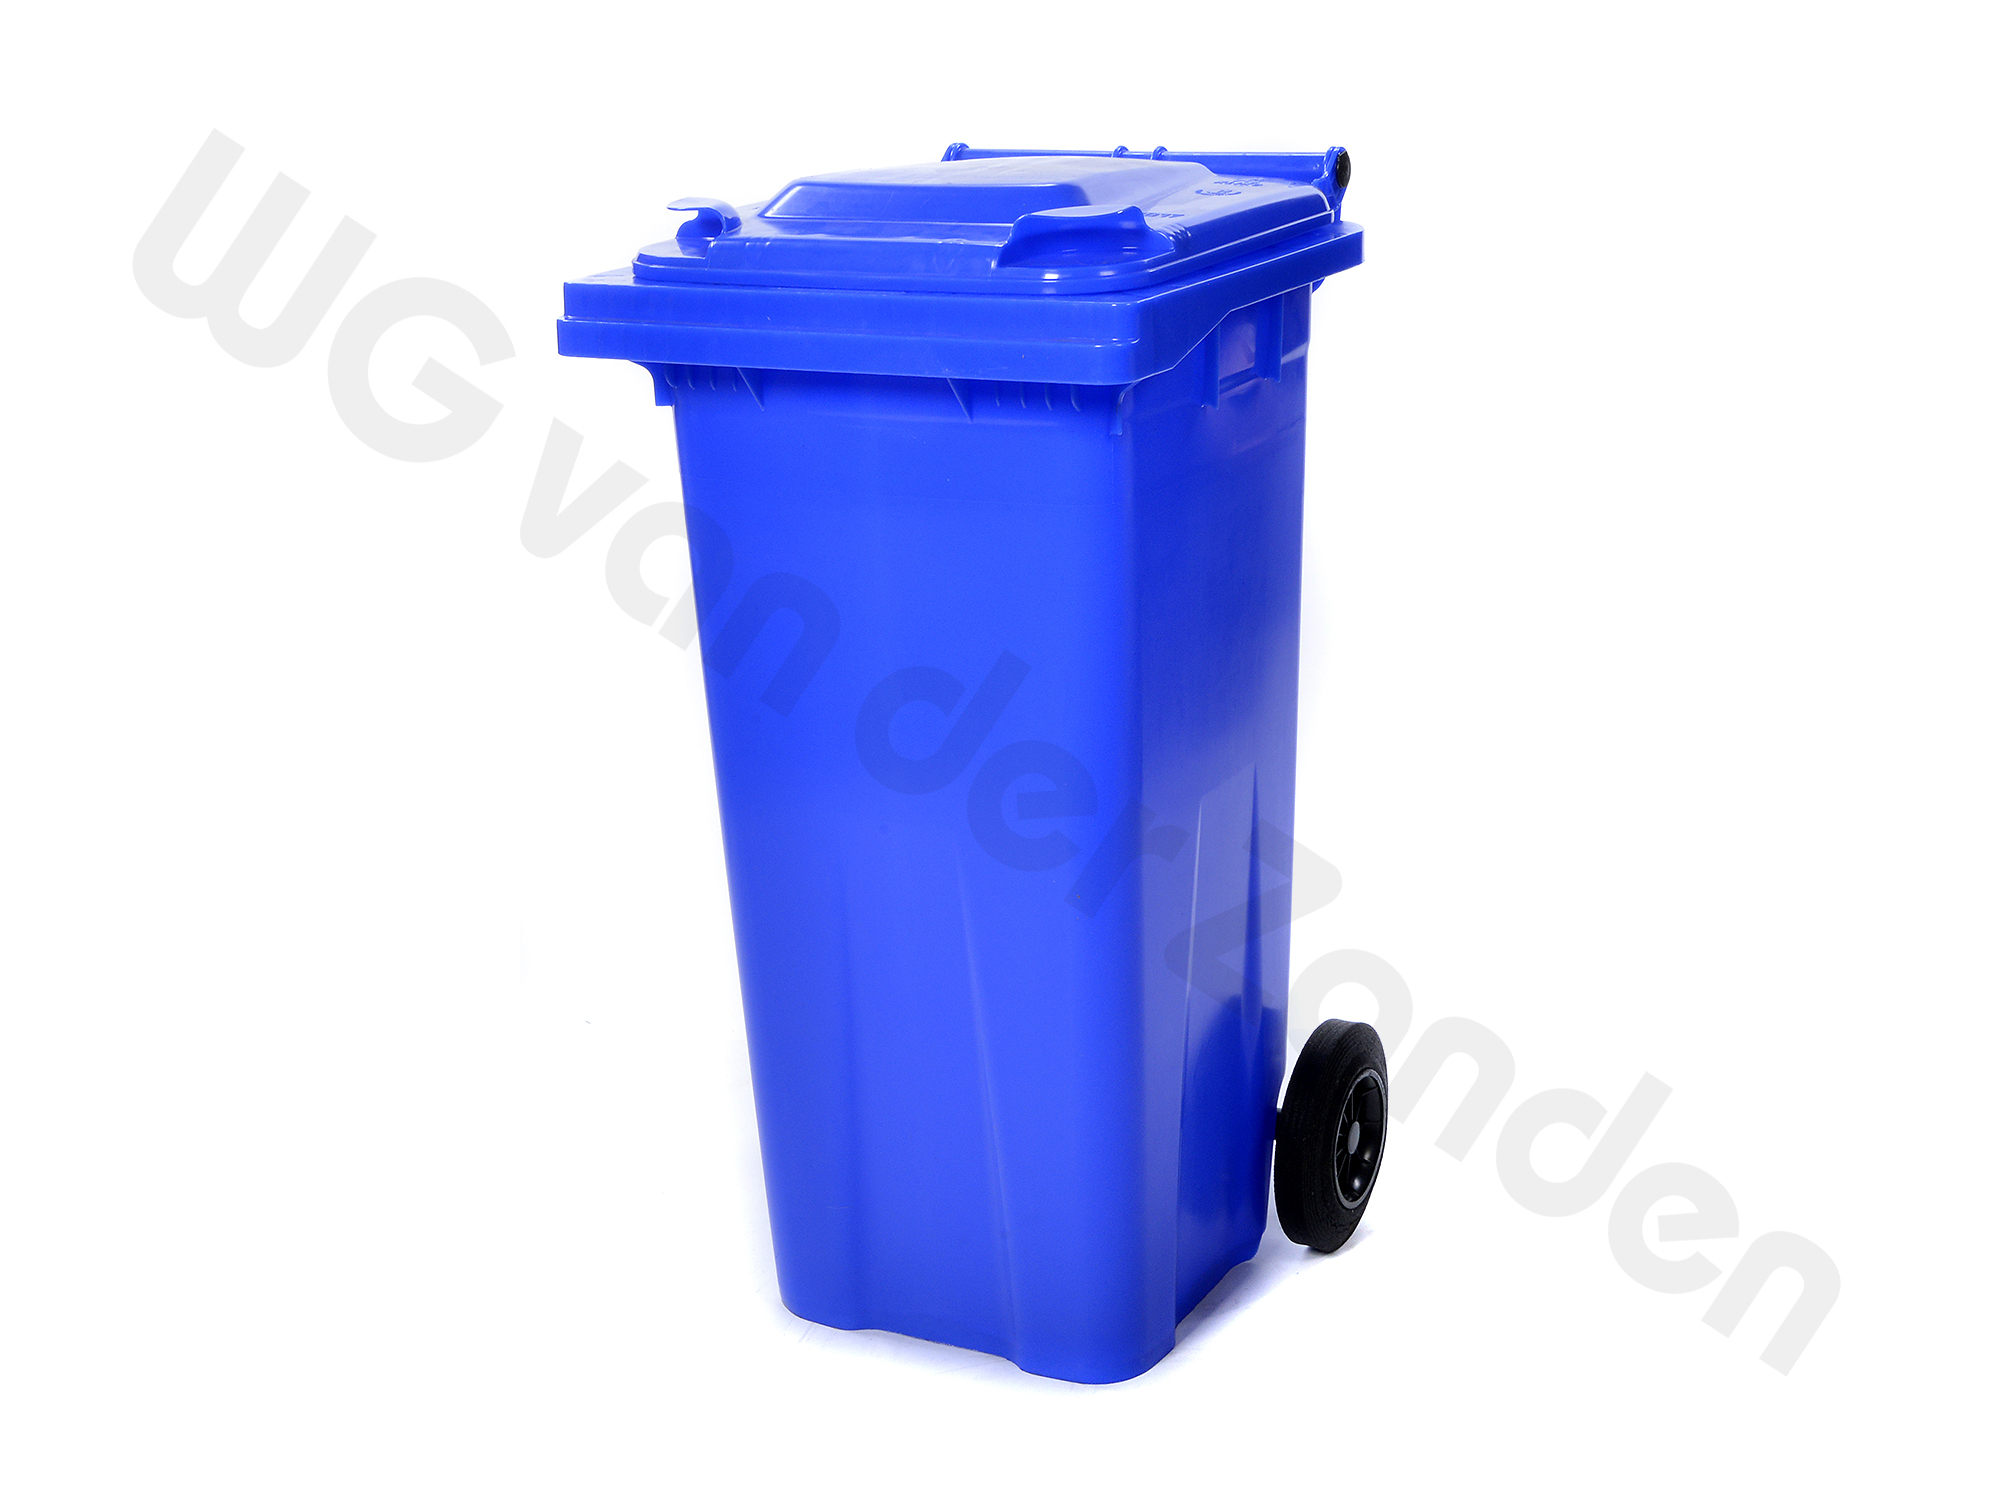 440143 GARBAGE CONTAINER 120 LTR PLASTIC TWO WHEELED BLUE